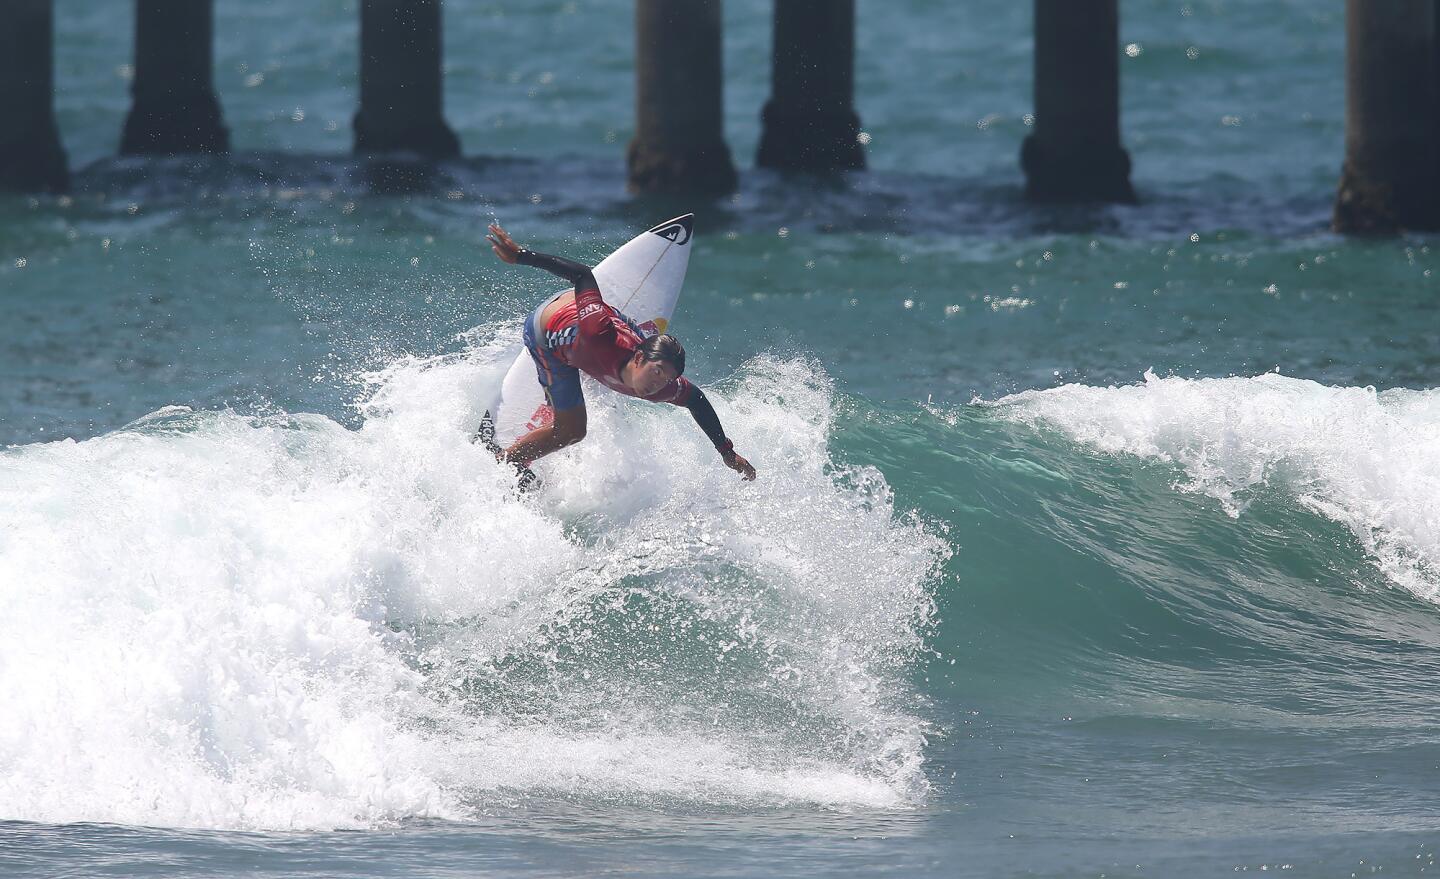 Huntington Beach local and defending champ Kanoa Igarashi goes backside off the top of a wave in route to his Men's round two heat win during the US Open of Surfing on Wednesday.